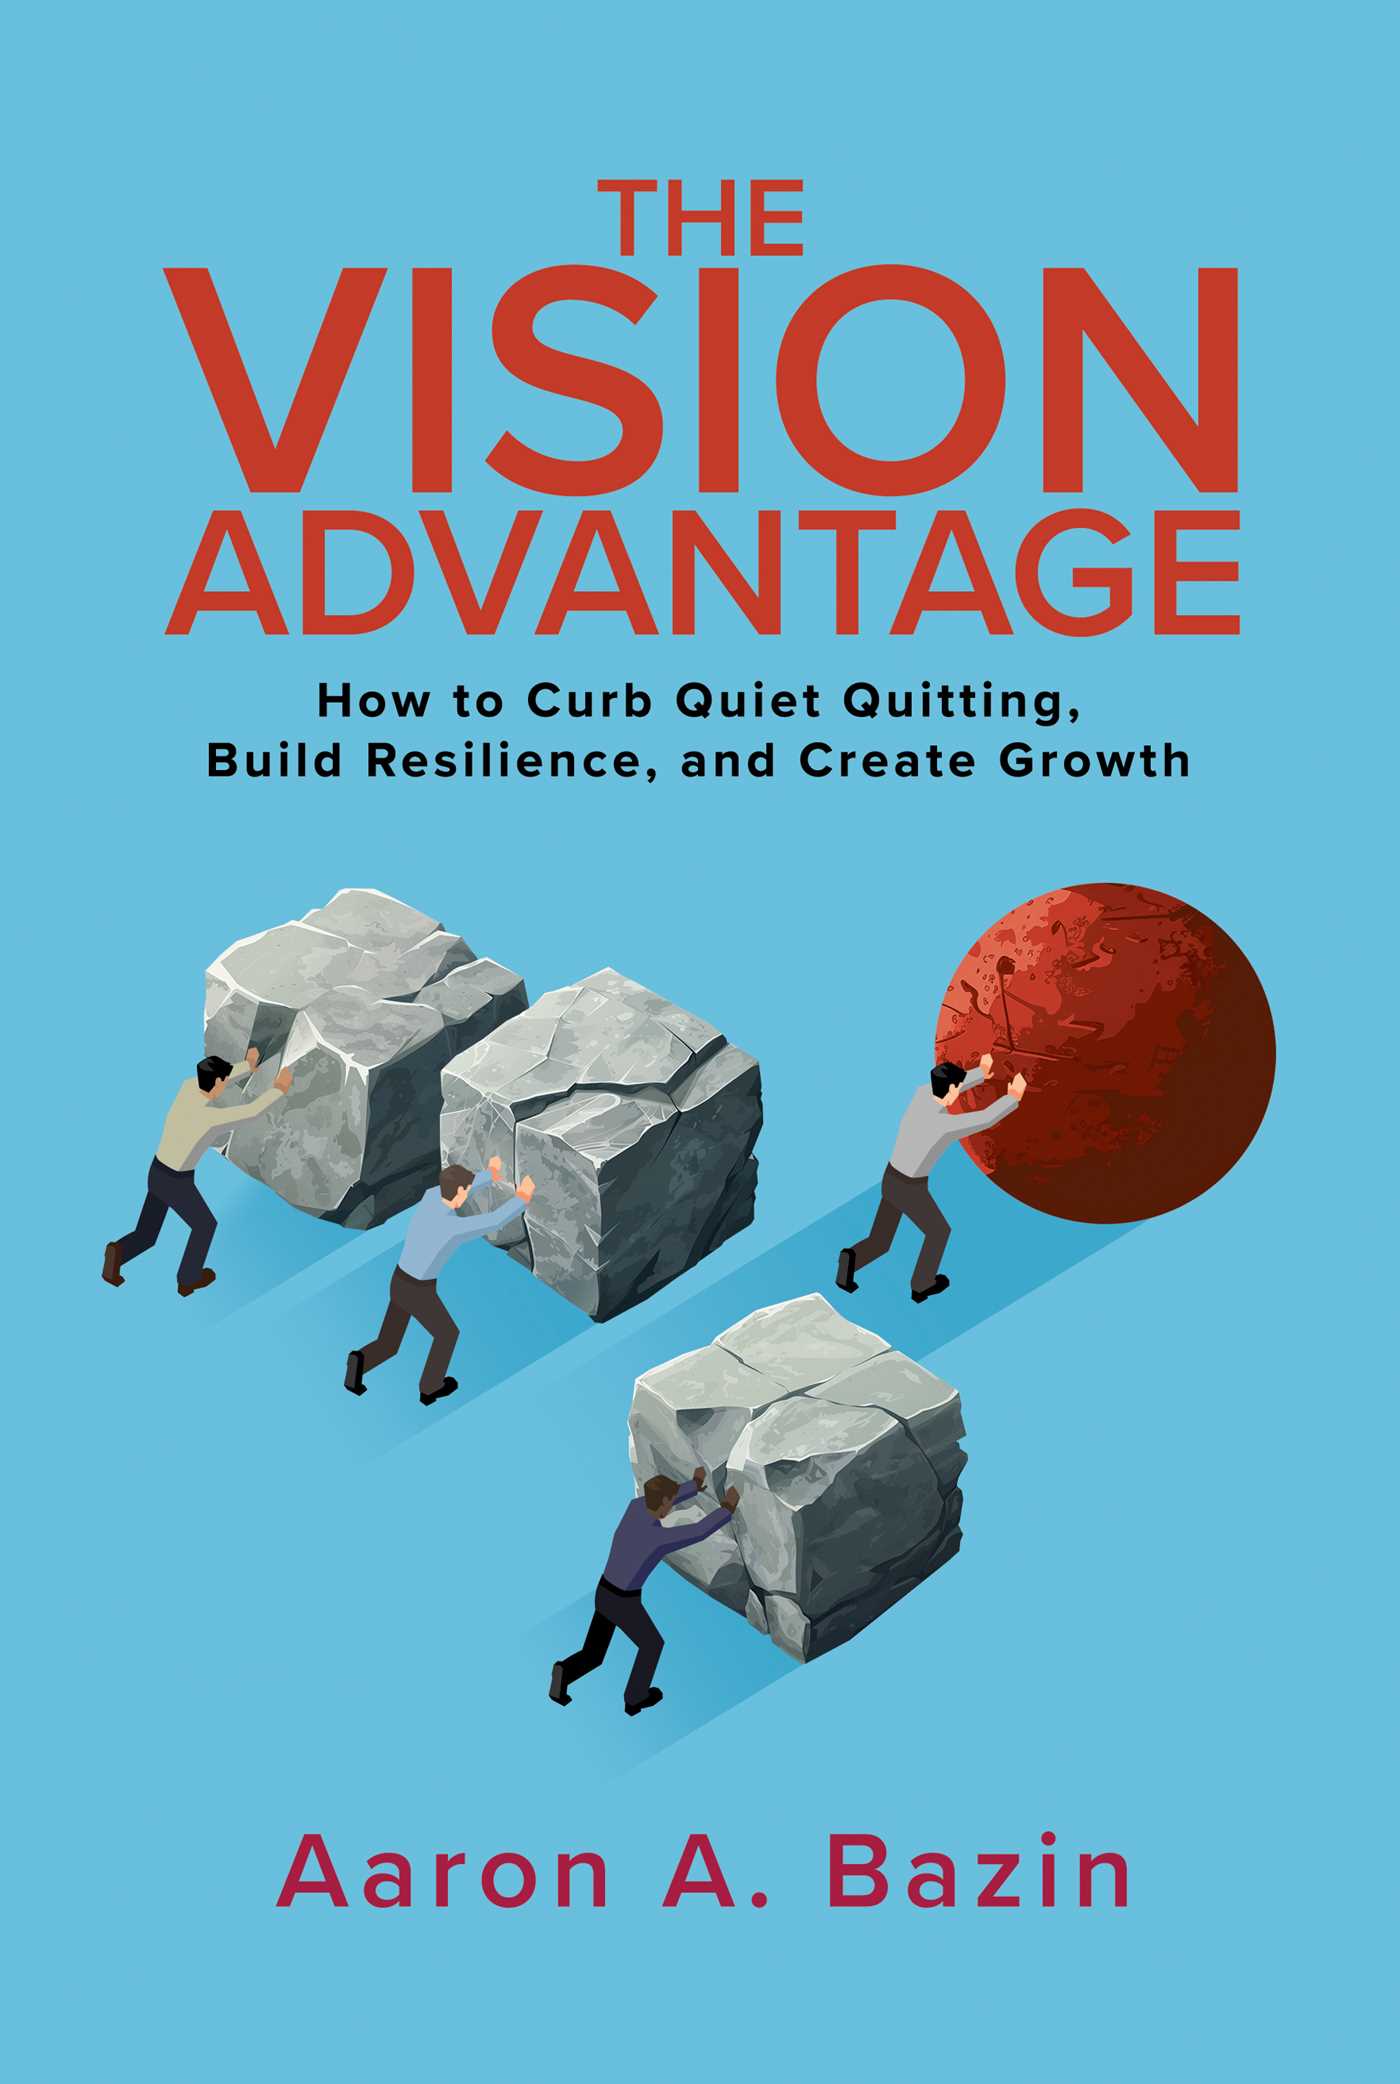 "The Vision Advantage" Now Available for Preorder